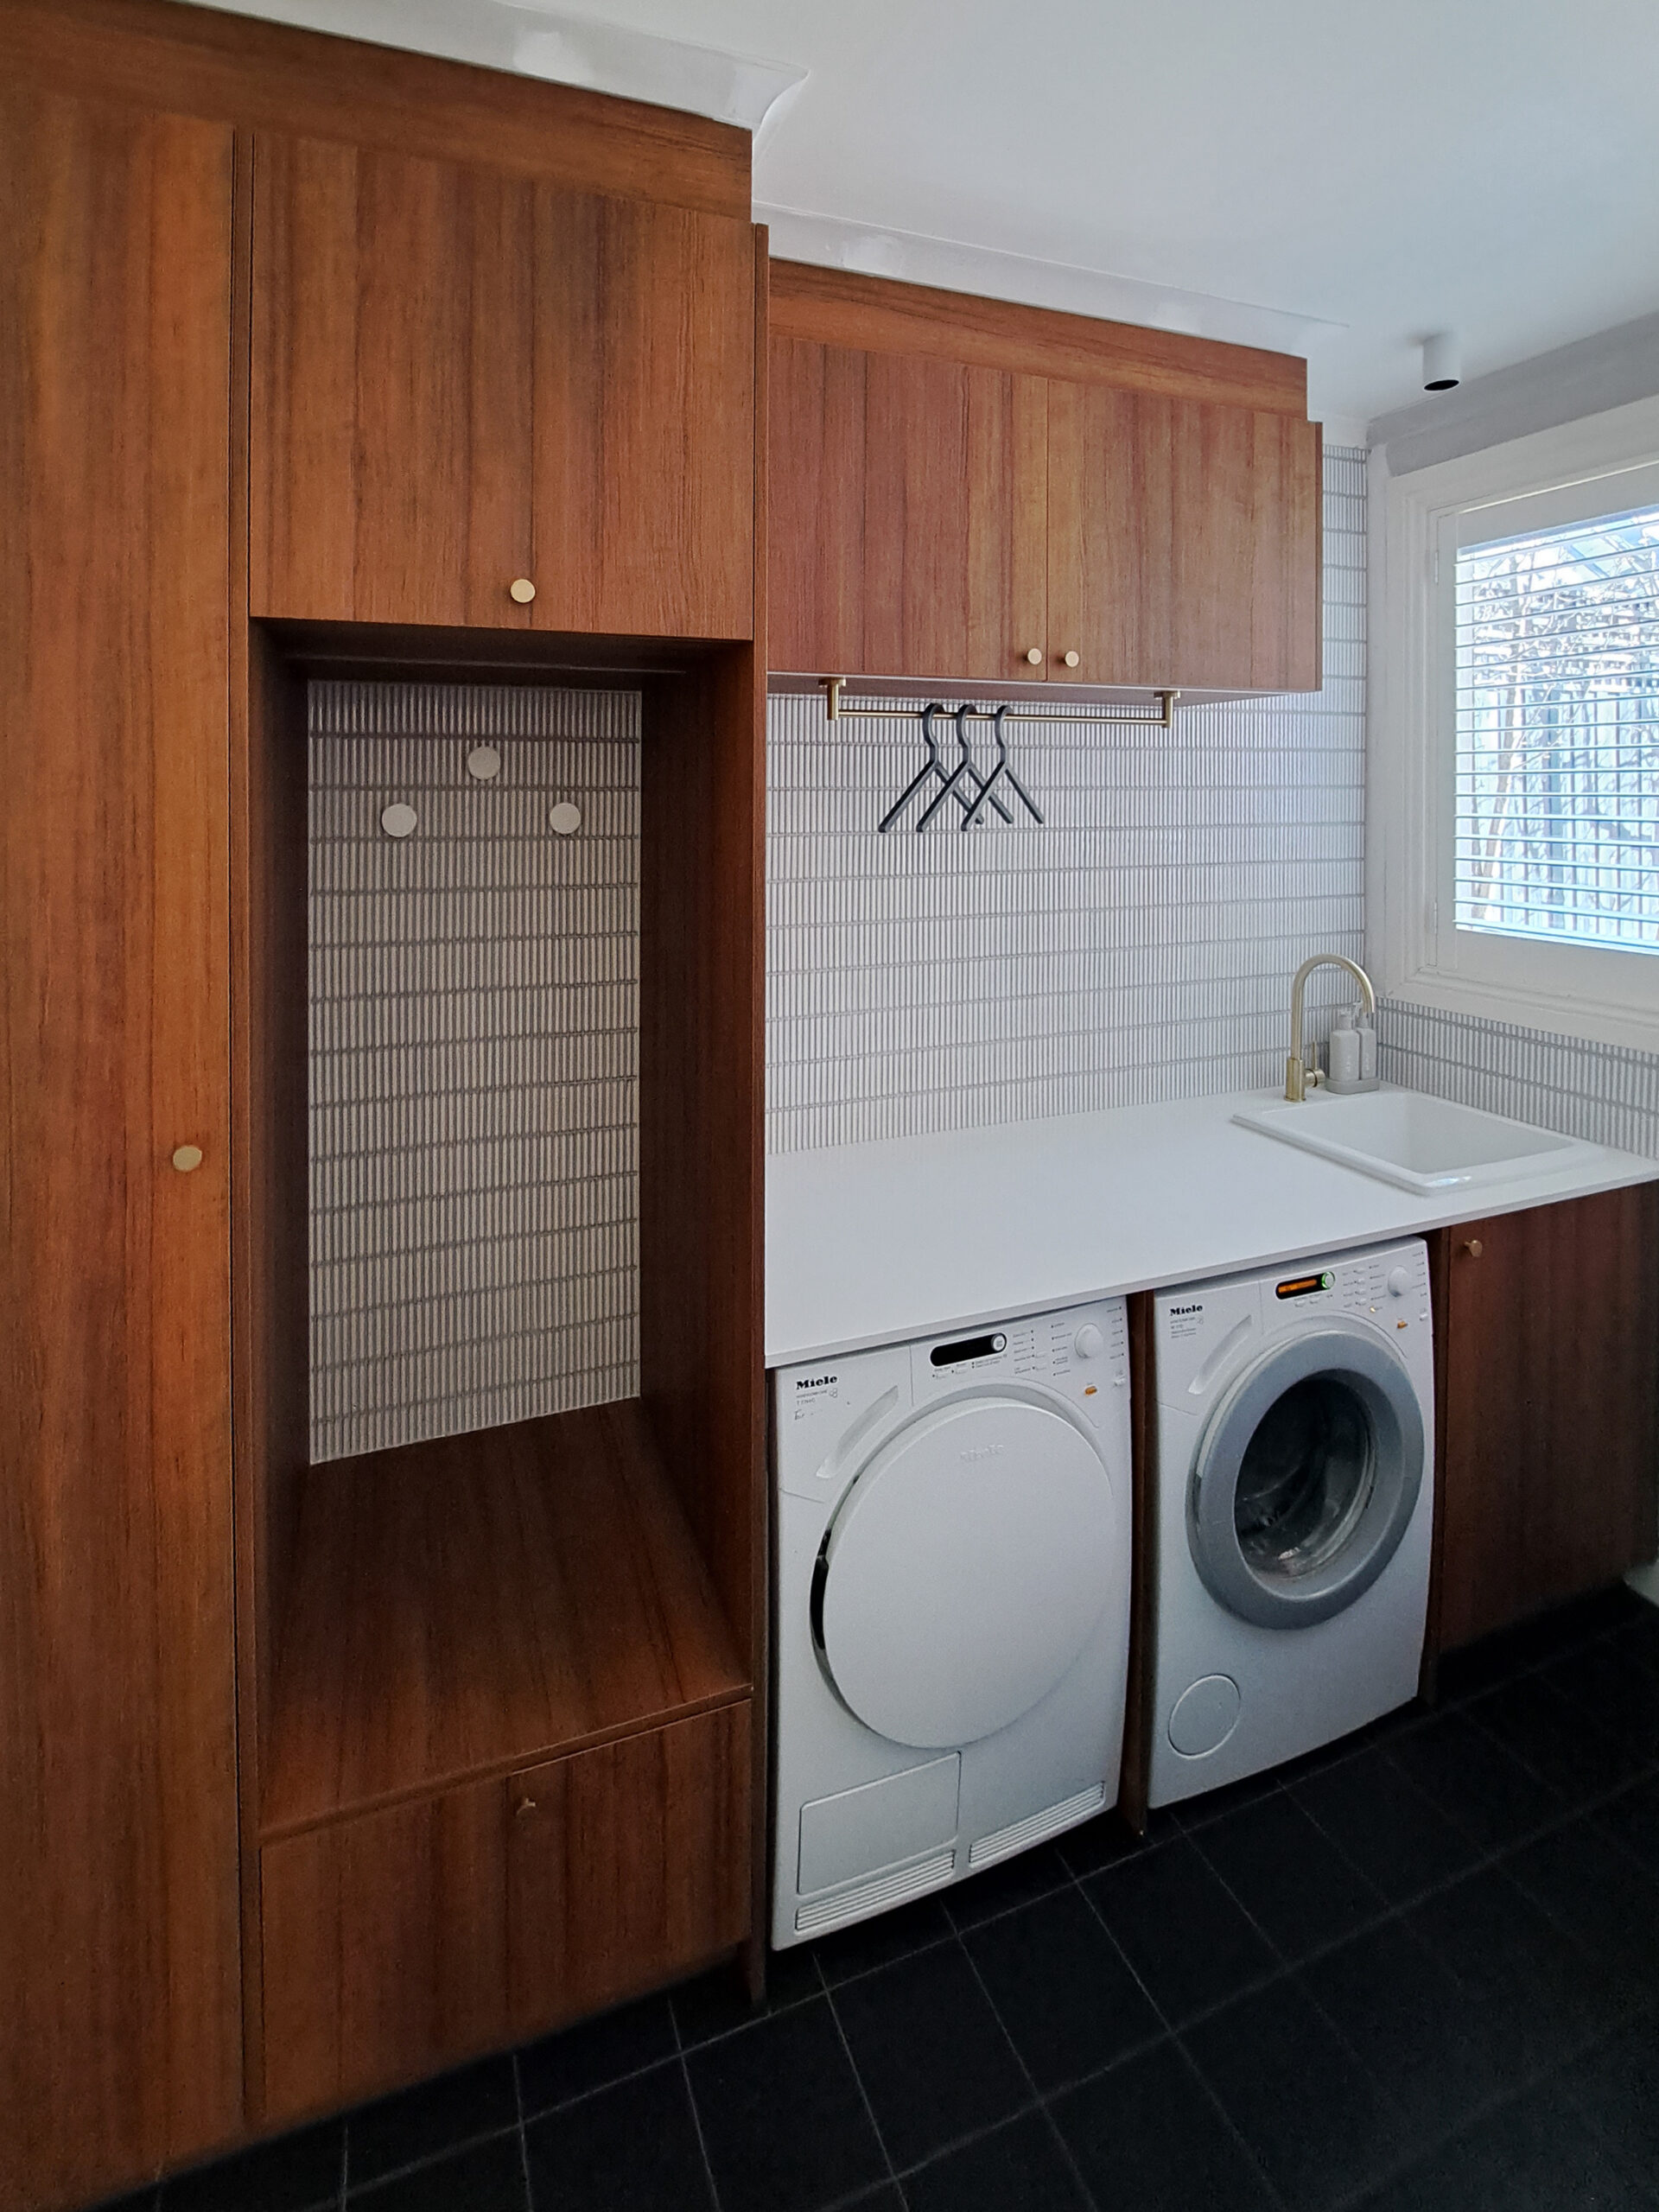 Laundry renovation ideas - The Inside Project